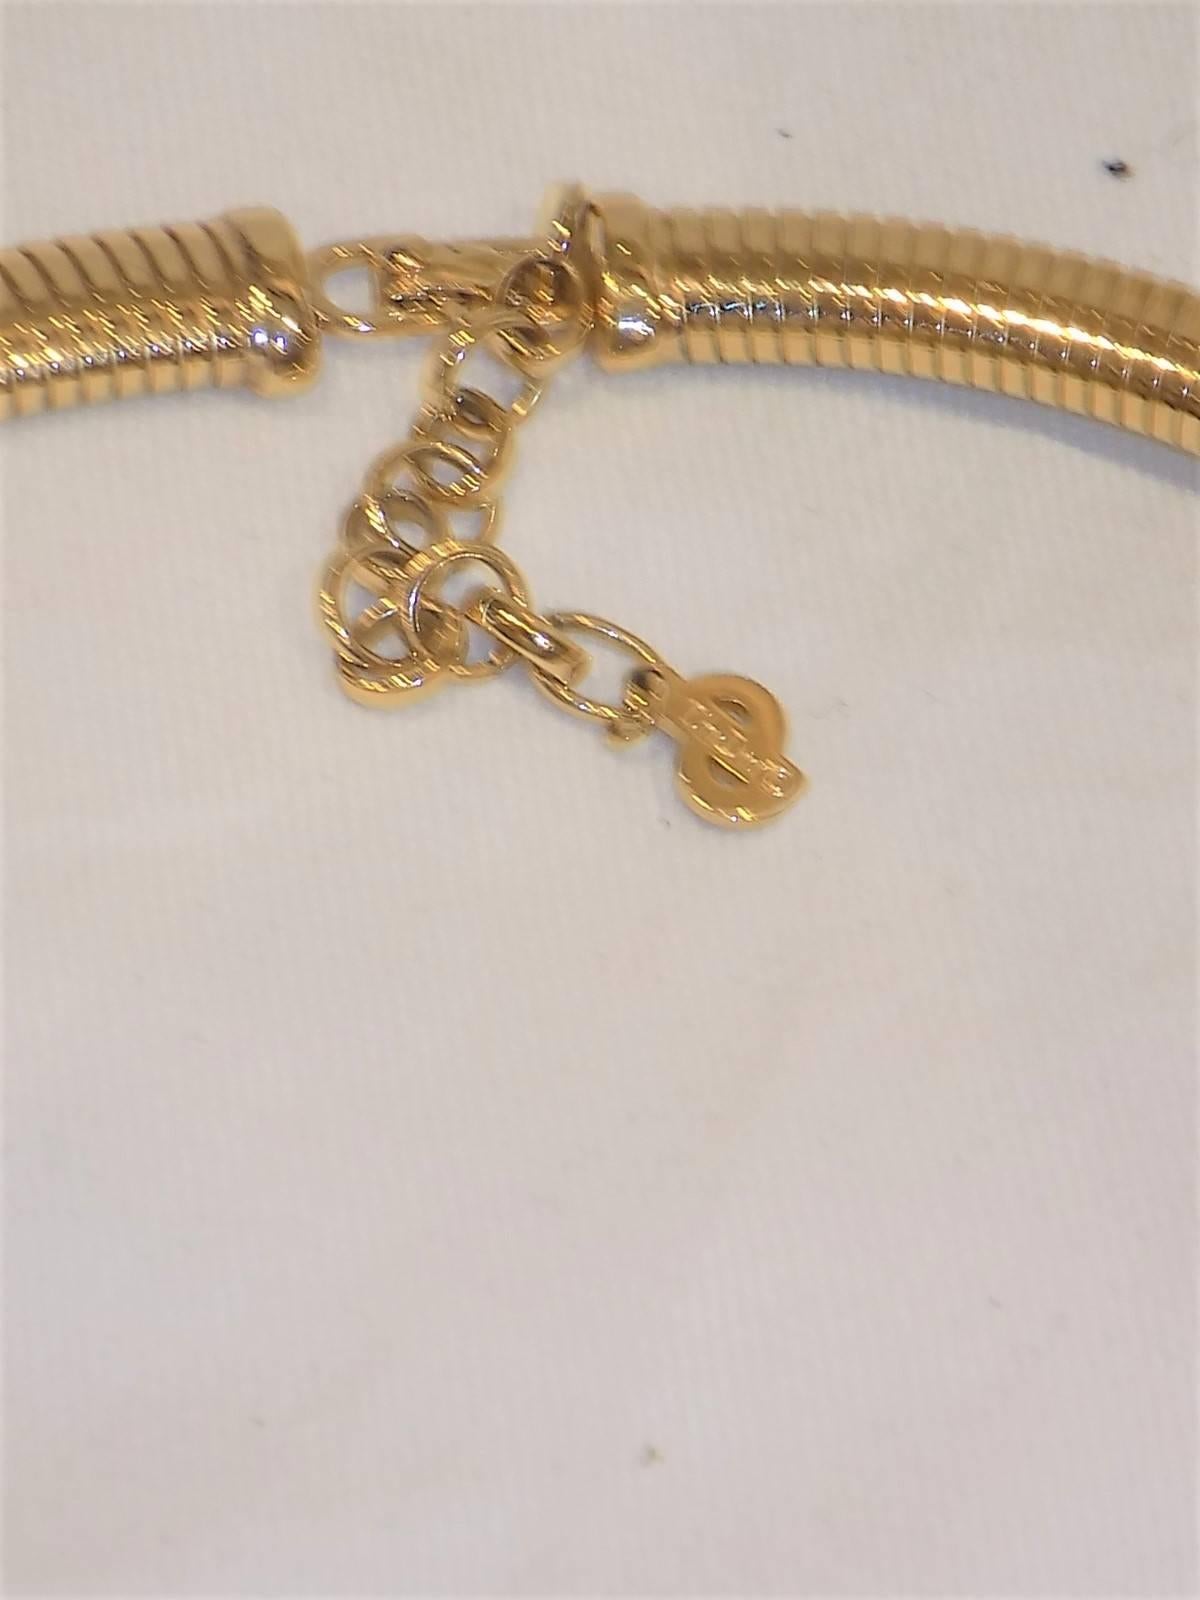 Beautiful Vintage DIOR  gold tone and crystals  choker necklace. Snake  style movement design with crystal embellished middle part. Beautiful Art Deco piece. 
Signed. Pristine condition like new. 